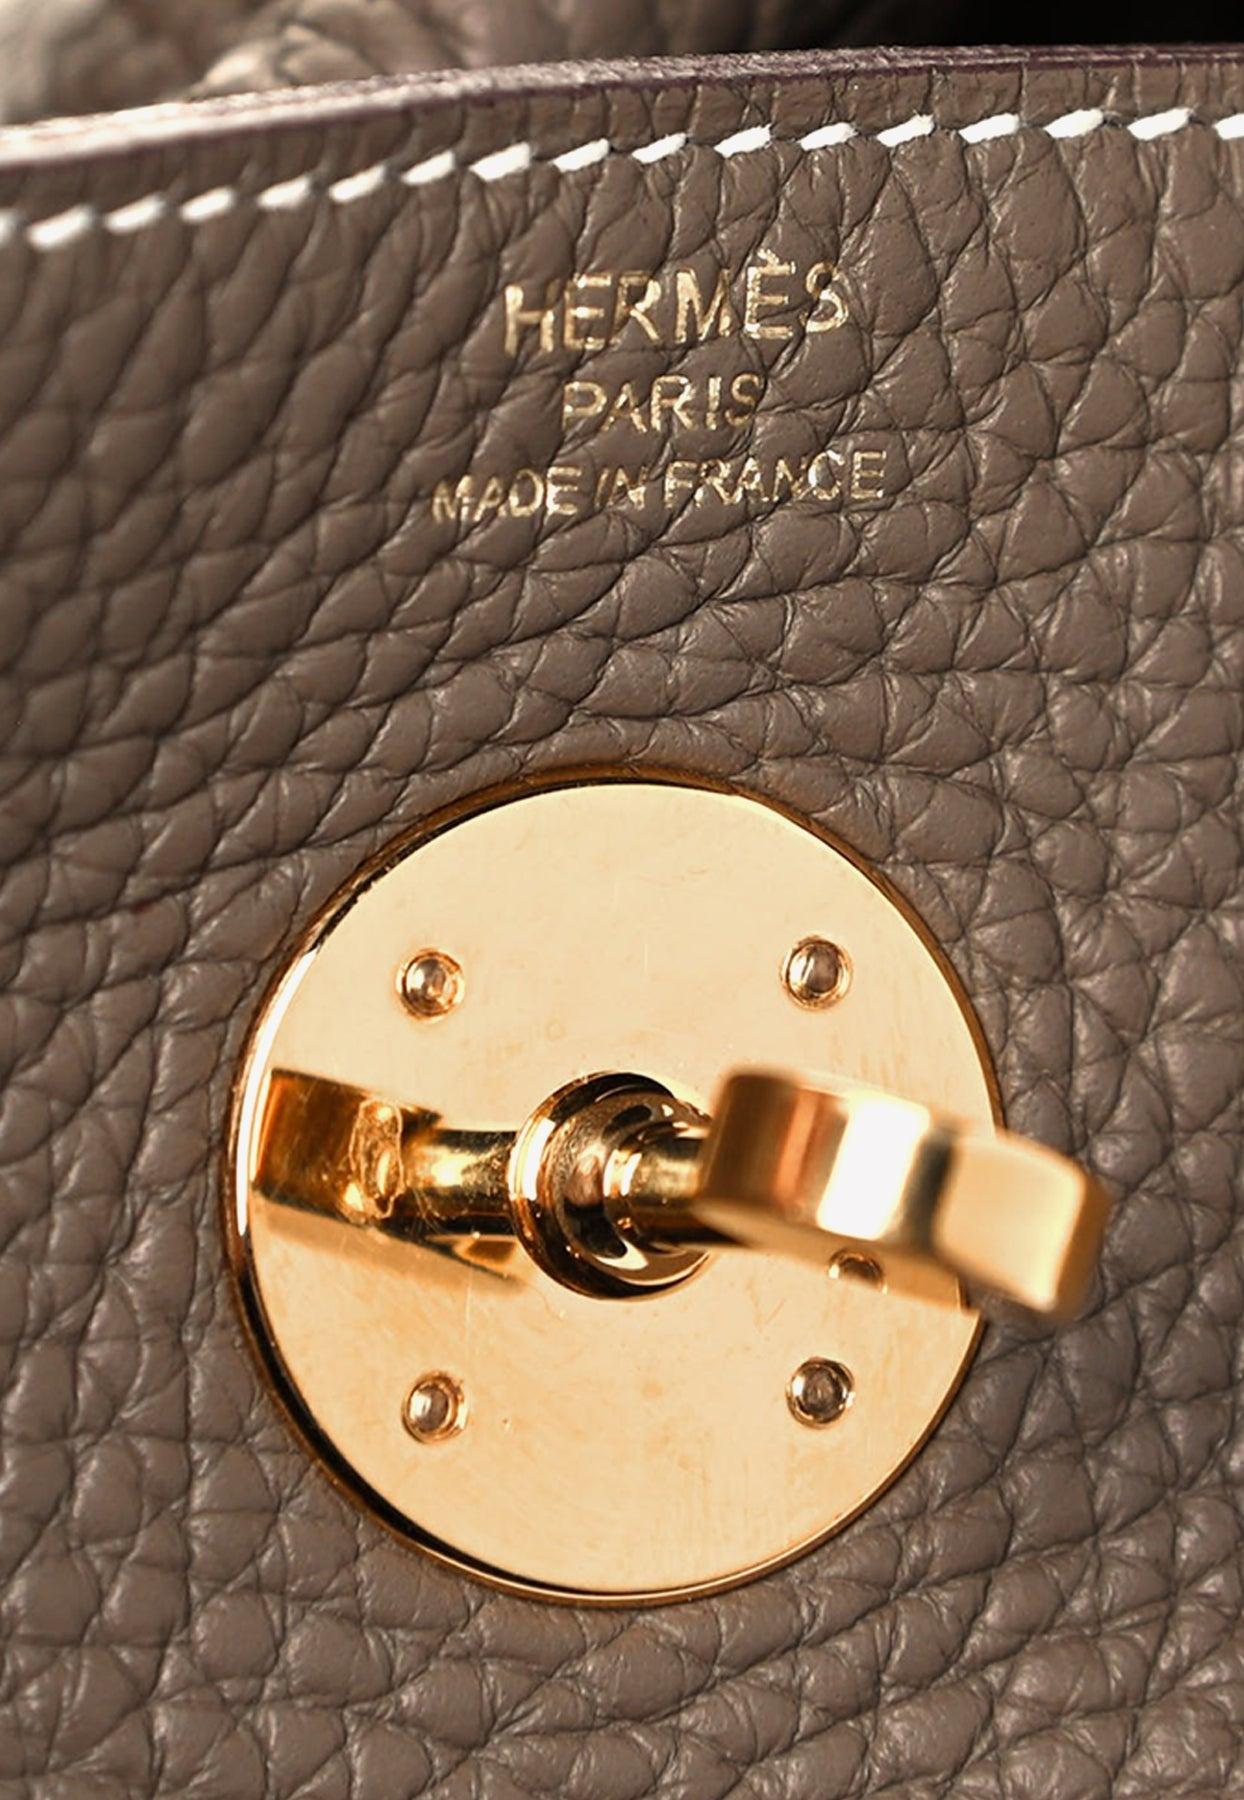 Hermès Lindy 26 In Etoupe Taurillon Clemence With Gold Hardware